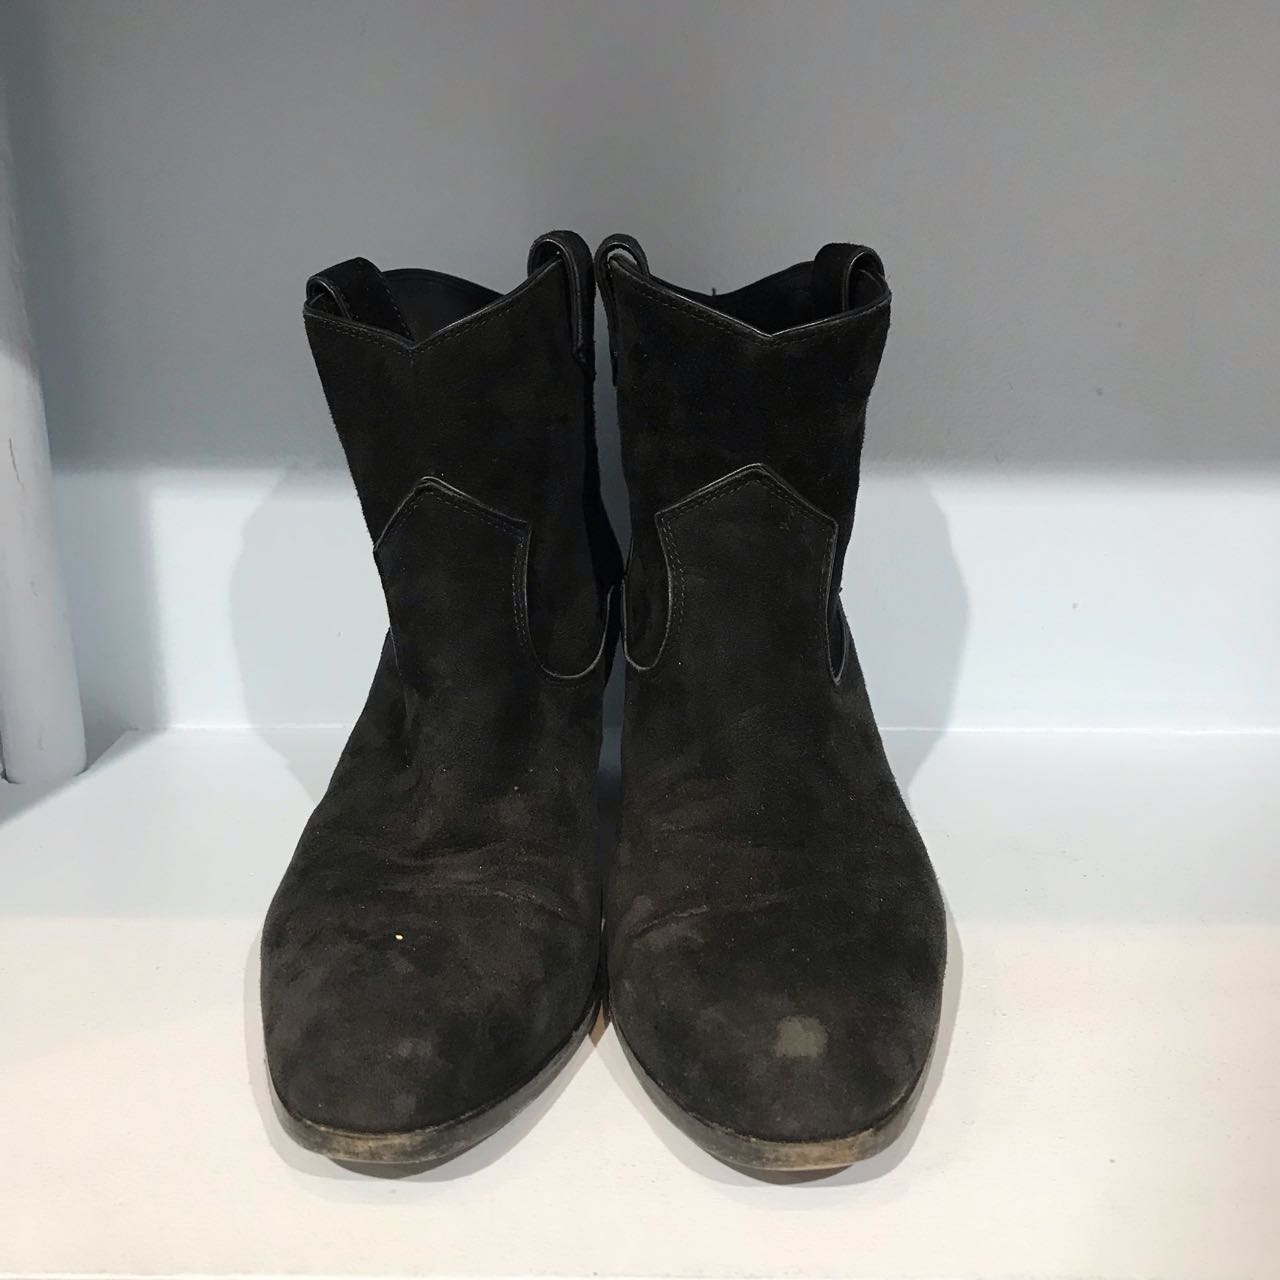 Boots Gianvito Rossi noires T.39,5